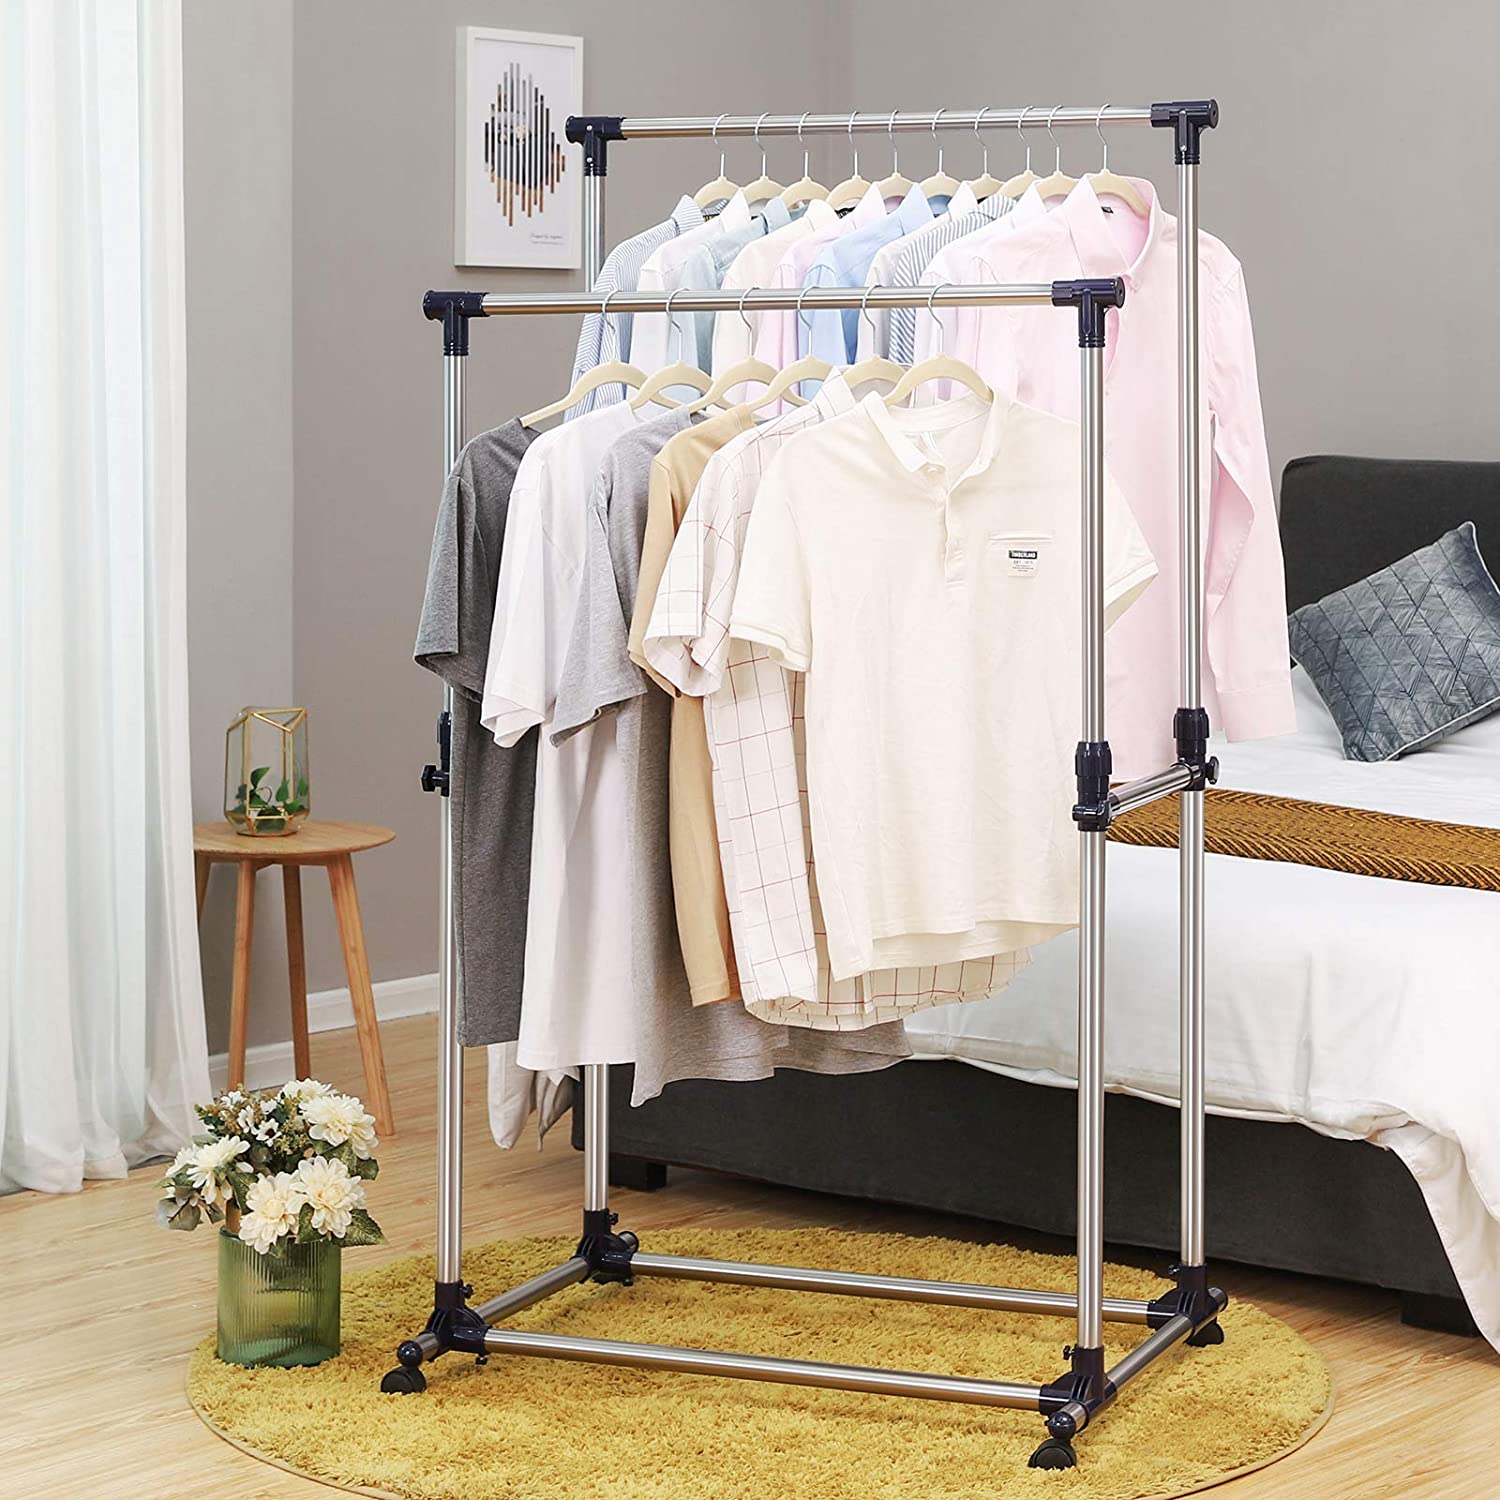 Top 10 Best Double Clothes Racks in 2022 - Top Best Pro Review